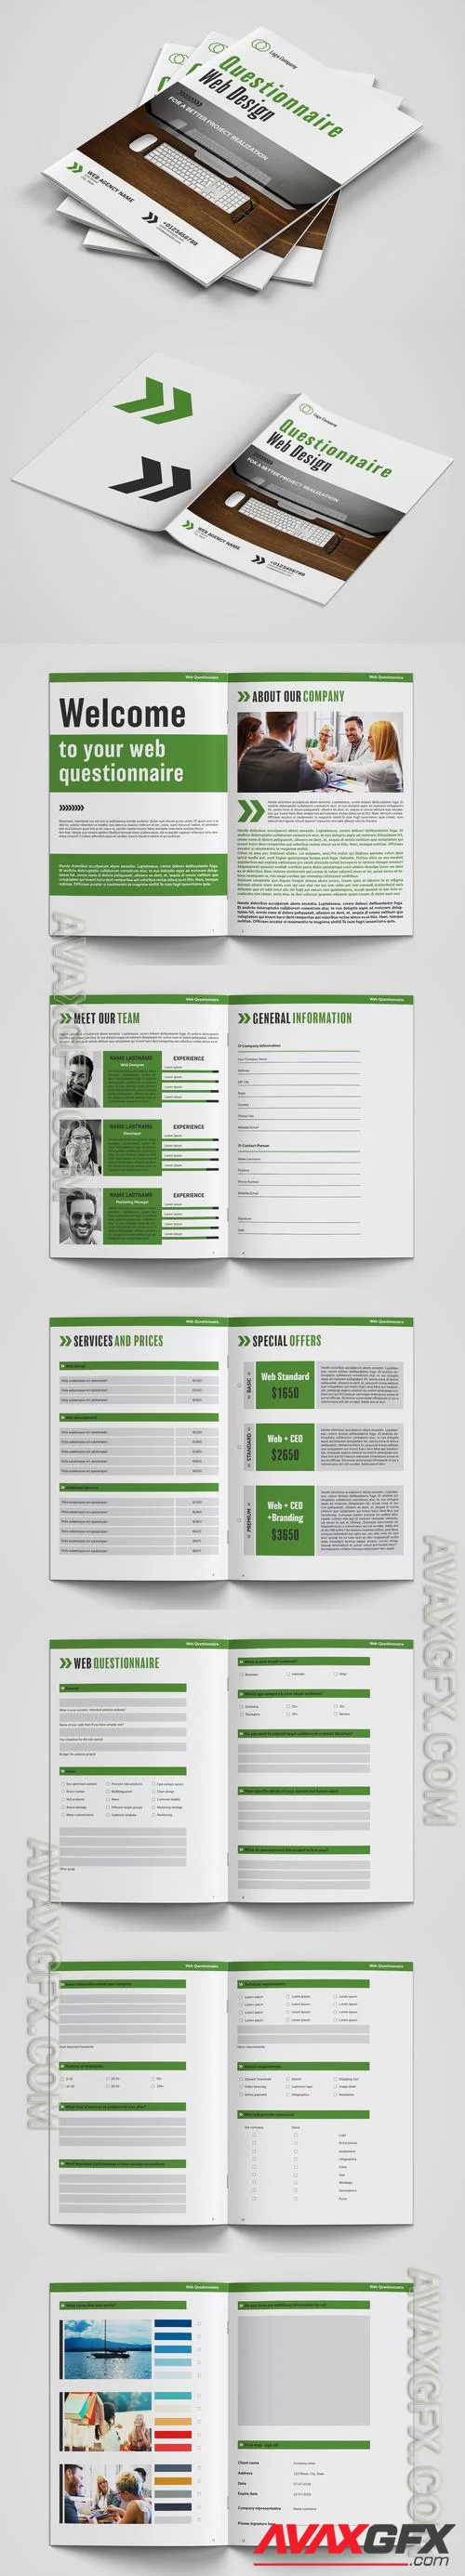 Questionnaire Layout with Green Accents 211177709 [Adobestock]